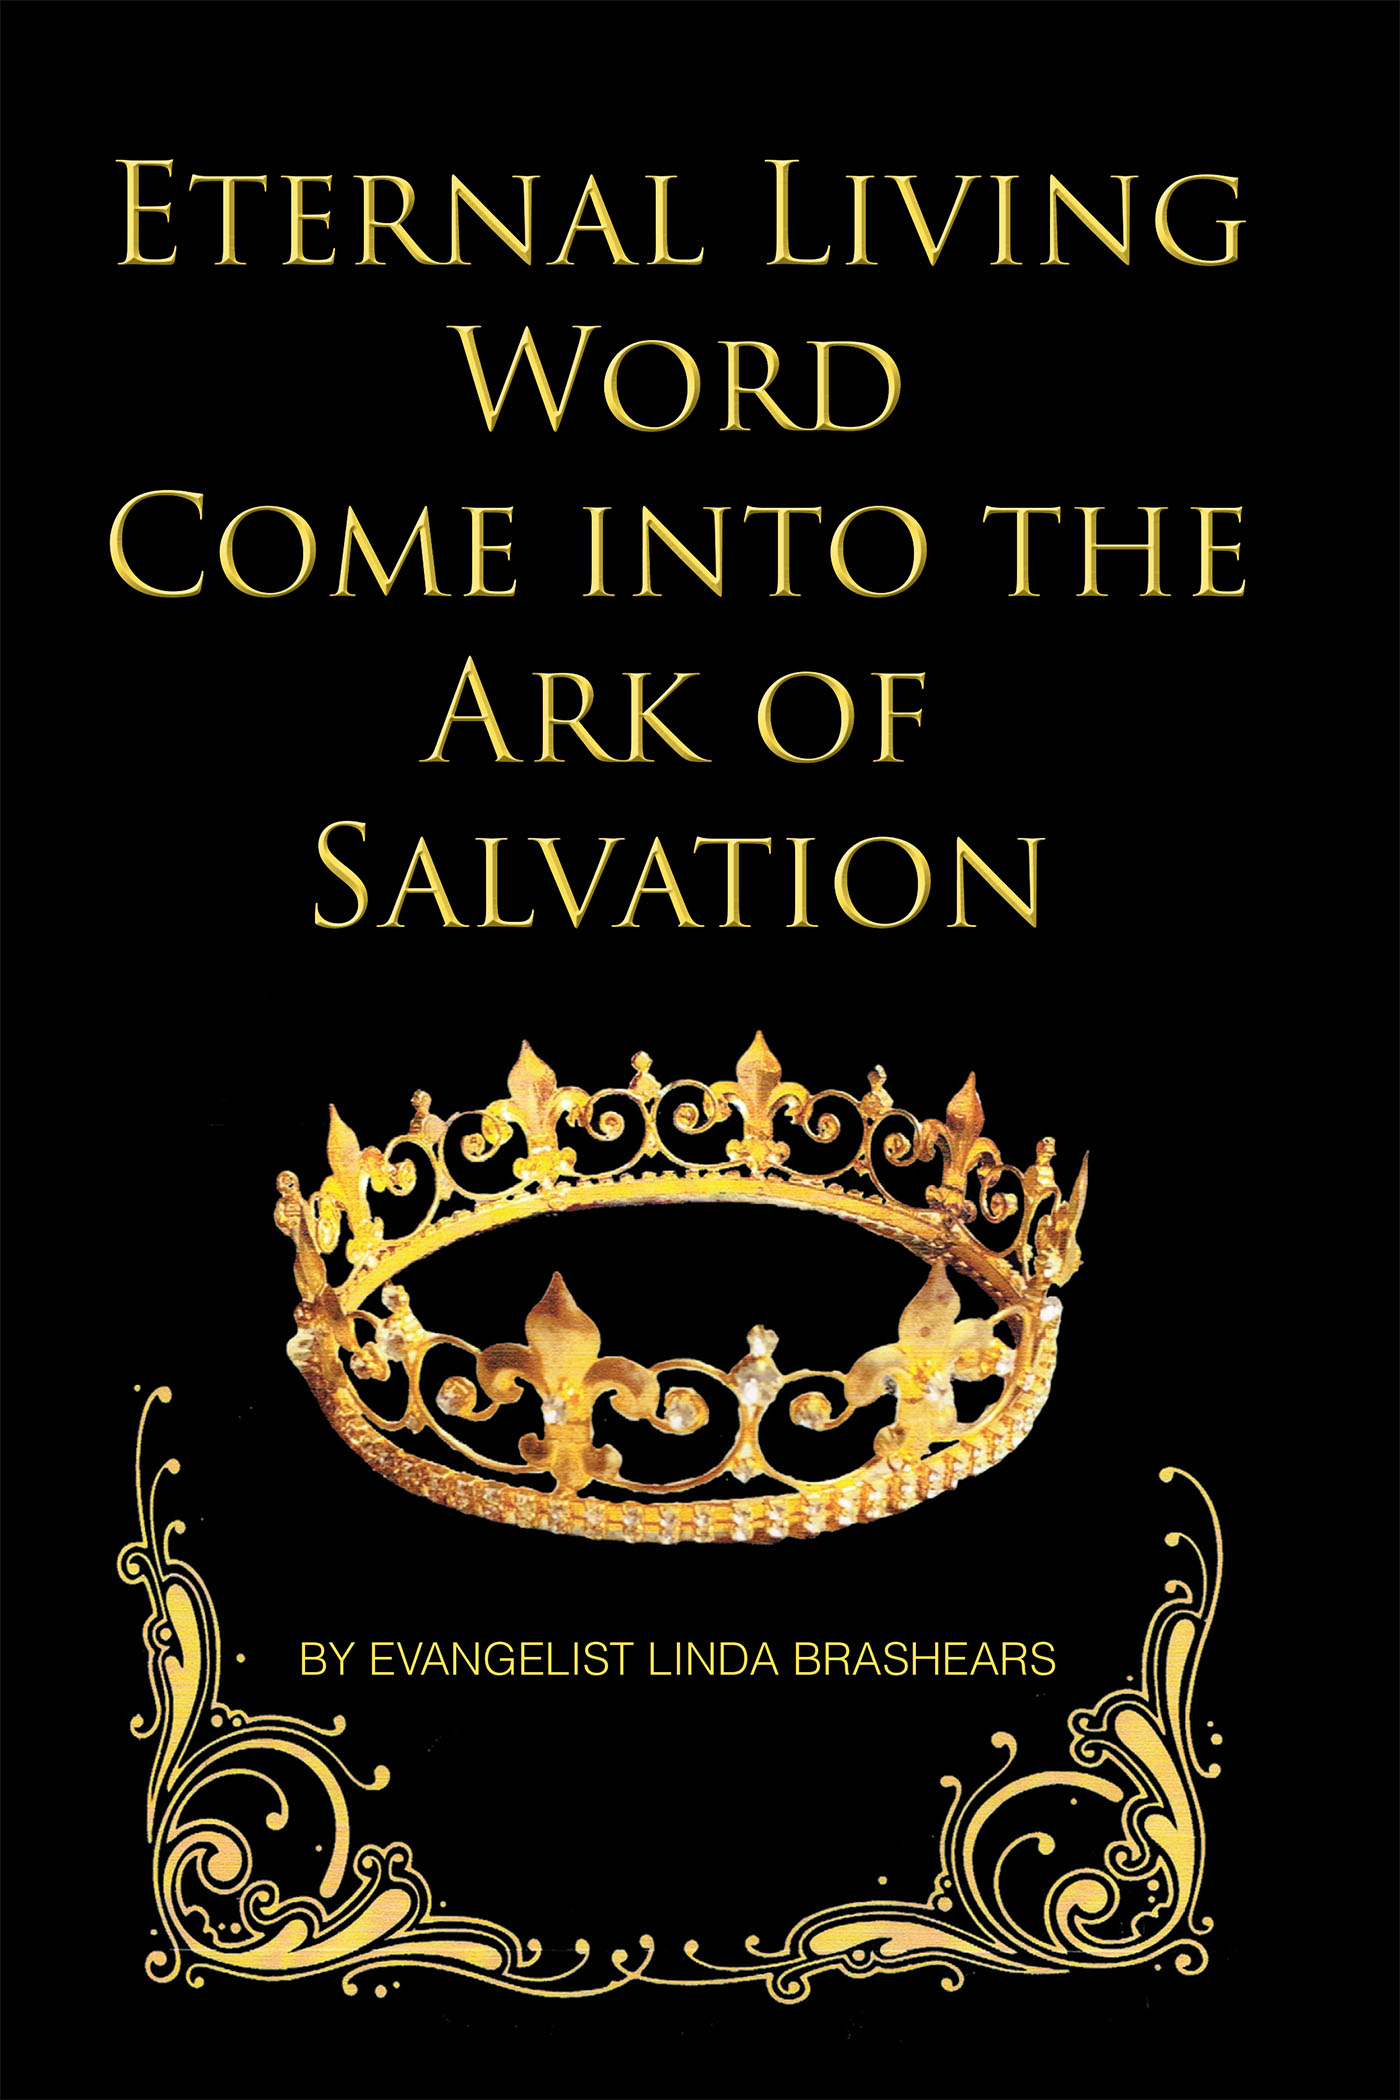 Evangelist Linda Brashears’s Newly Released "Eternal Living Word: My Name is Jealous: Come into the Ark of Salvation" is an Engaging Exploration of Scripture